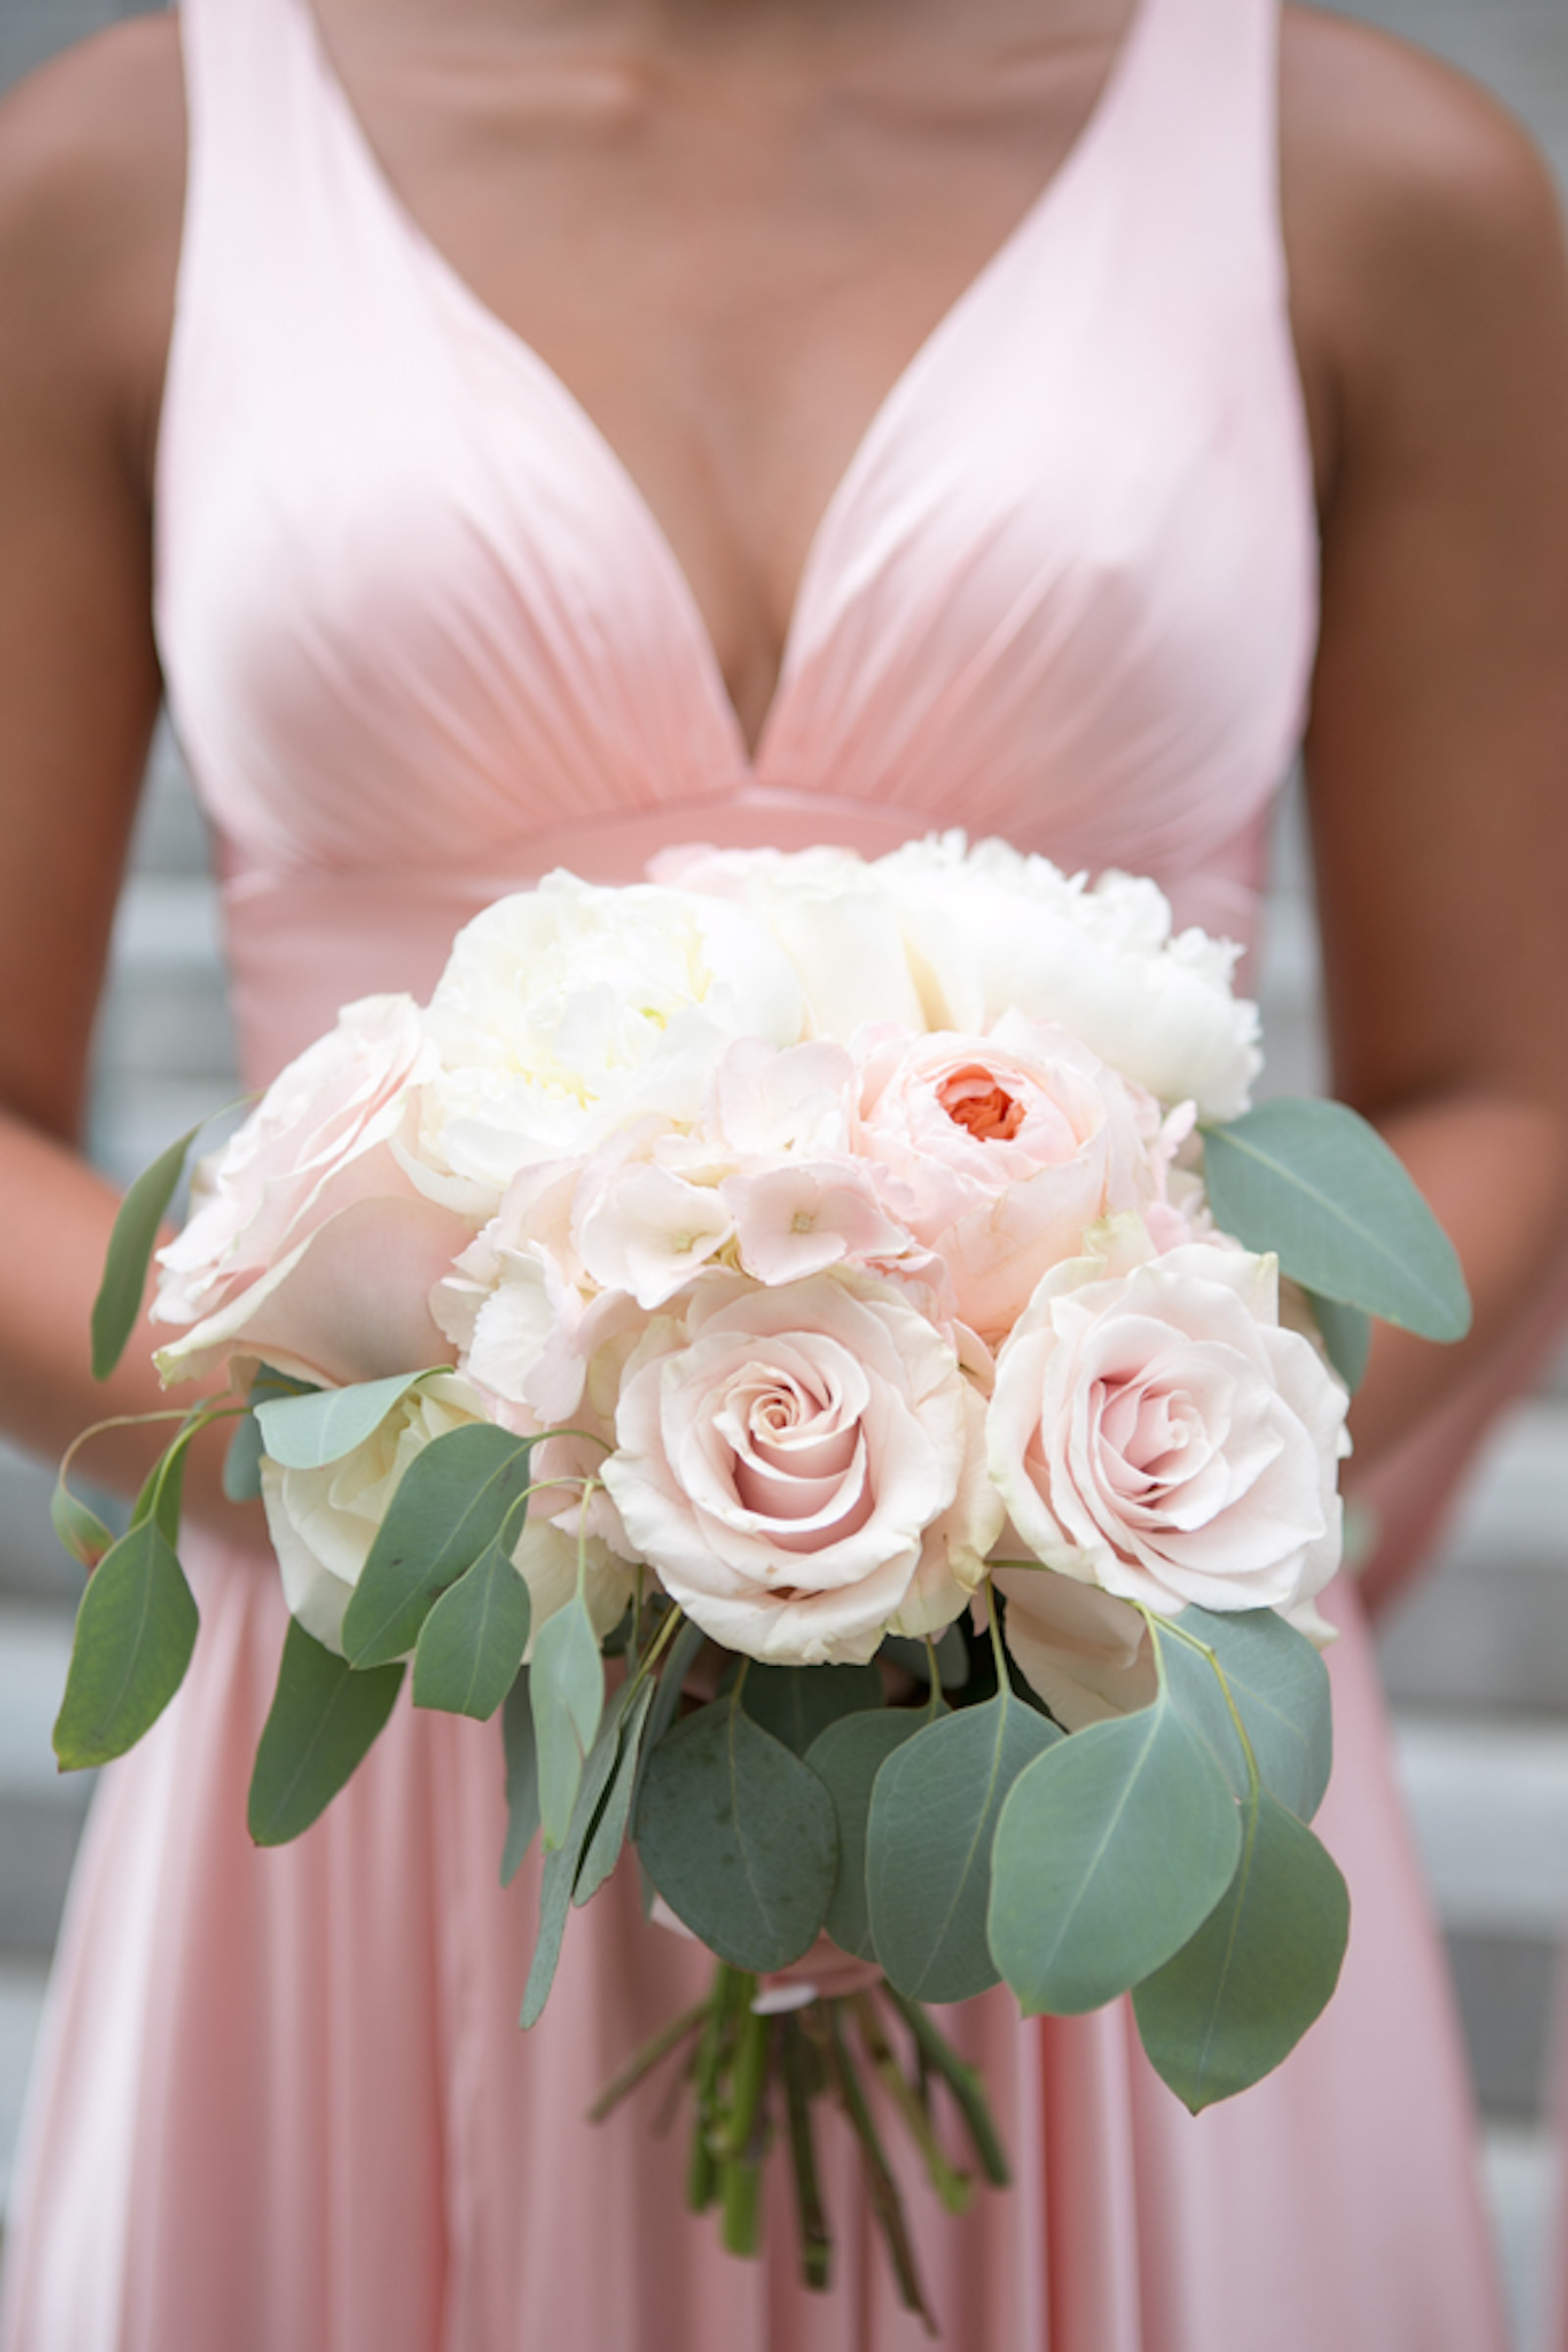 Wedding Round Bridesmaid Bouquet with Blush Pink Roses and Peonies with Ivory Hydrangea and Eucalyptus Greenery | Blush Pink Silk Satin Formal V Neck Bridesmaid Dress